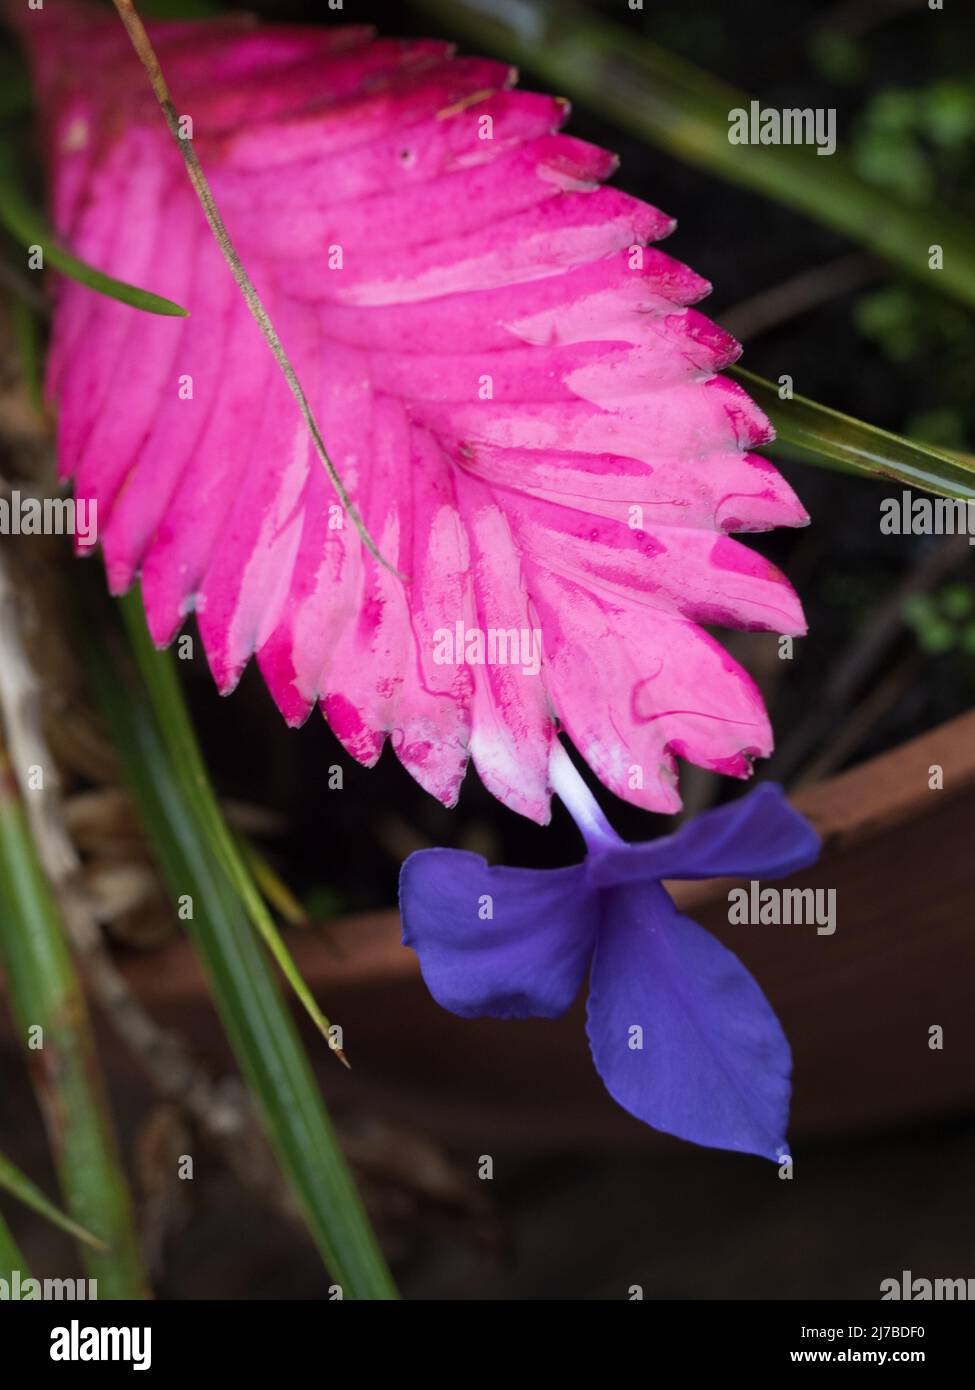 Pink Quill plant , Wet Paddle shaped Hot Pink Bracts Bromelliad, Tillandsia Cyanea, with a single purple flower blooming on the end, Australian garden Stock Photo